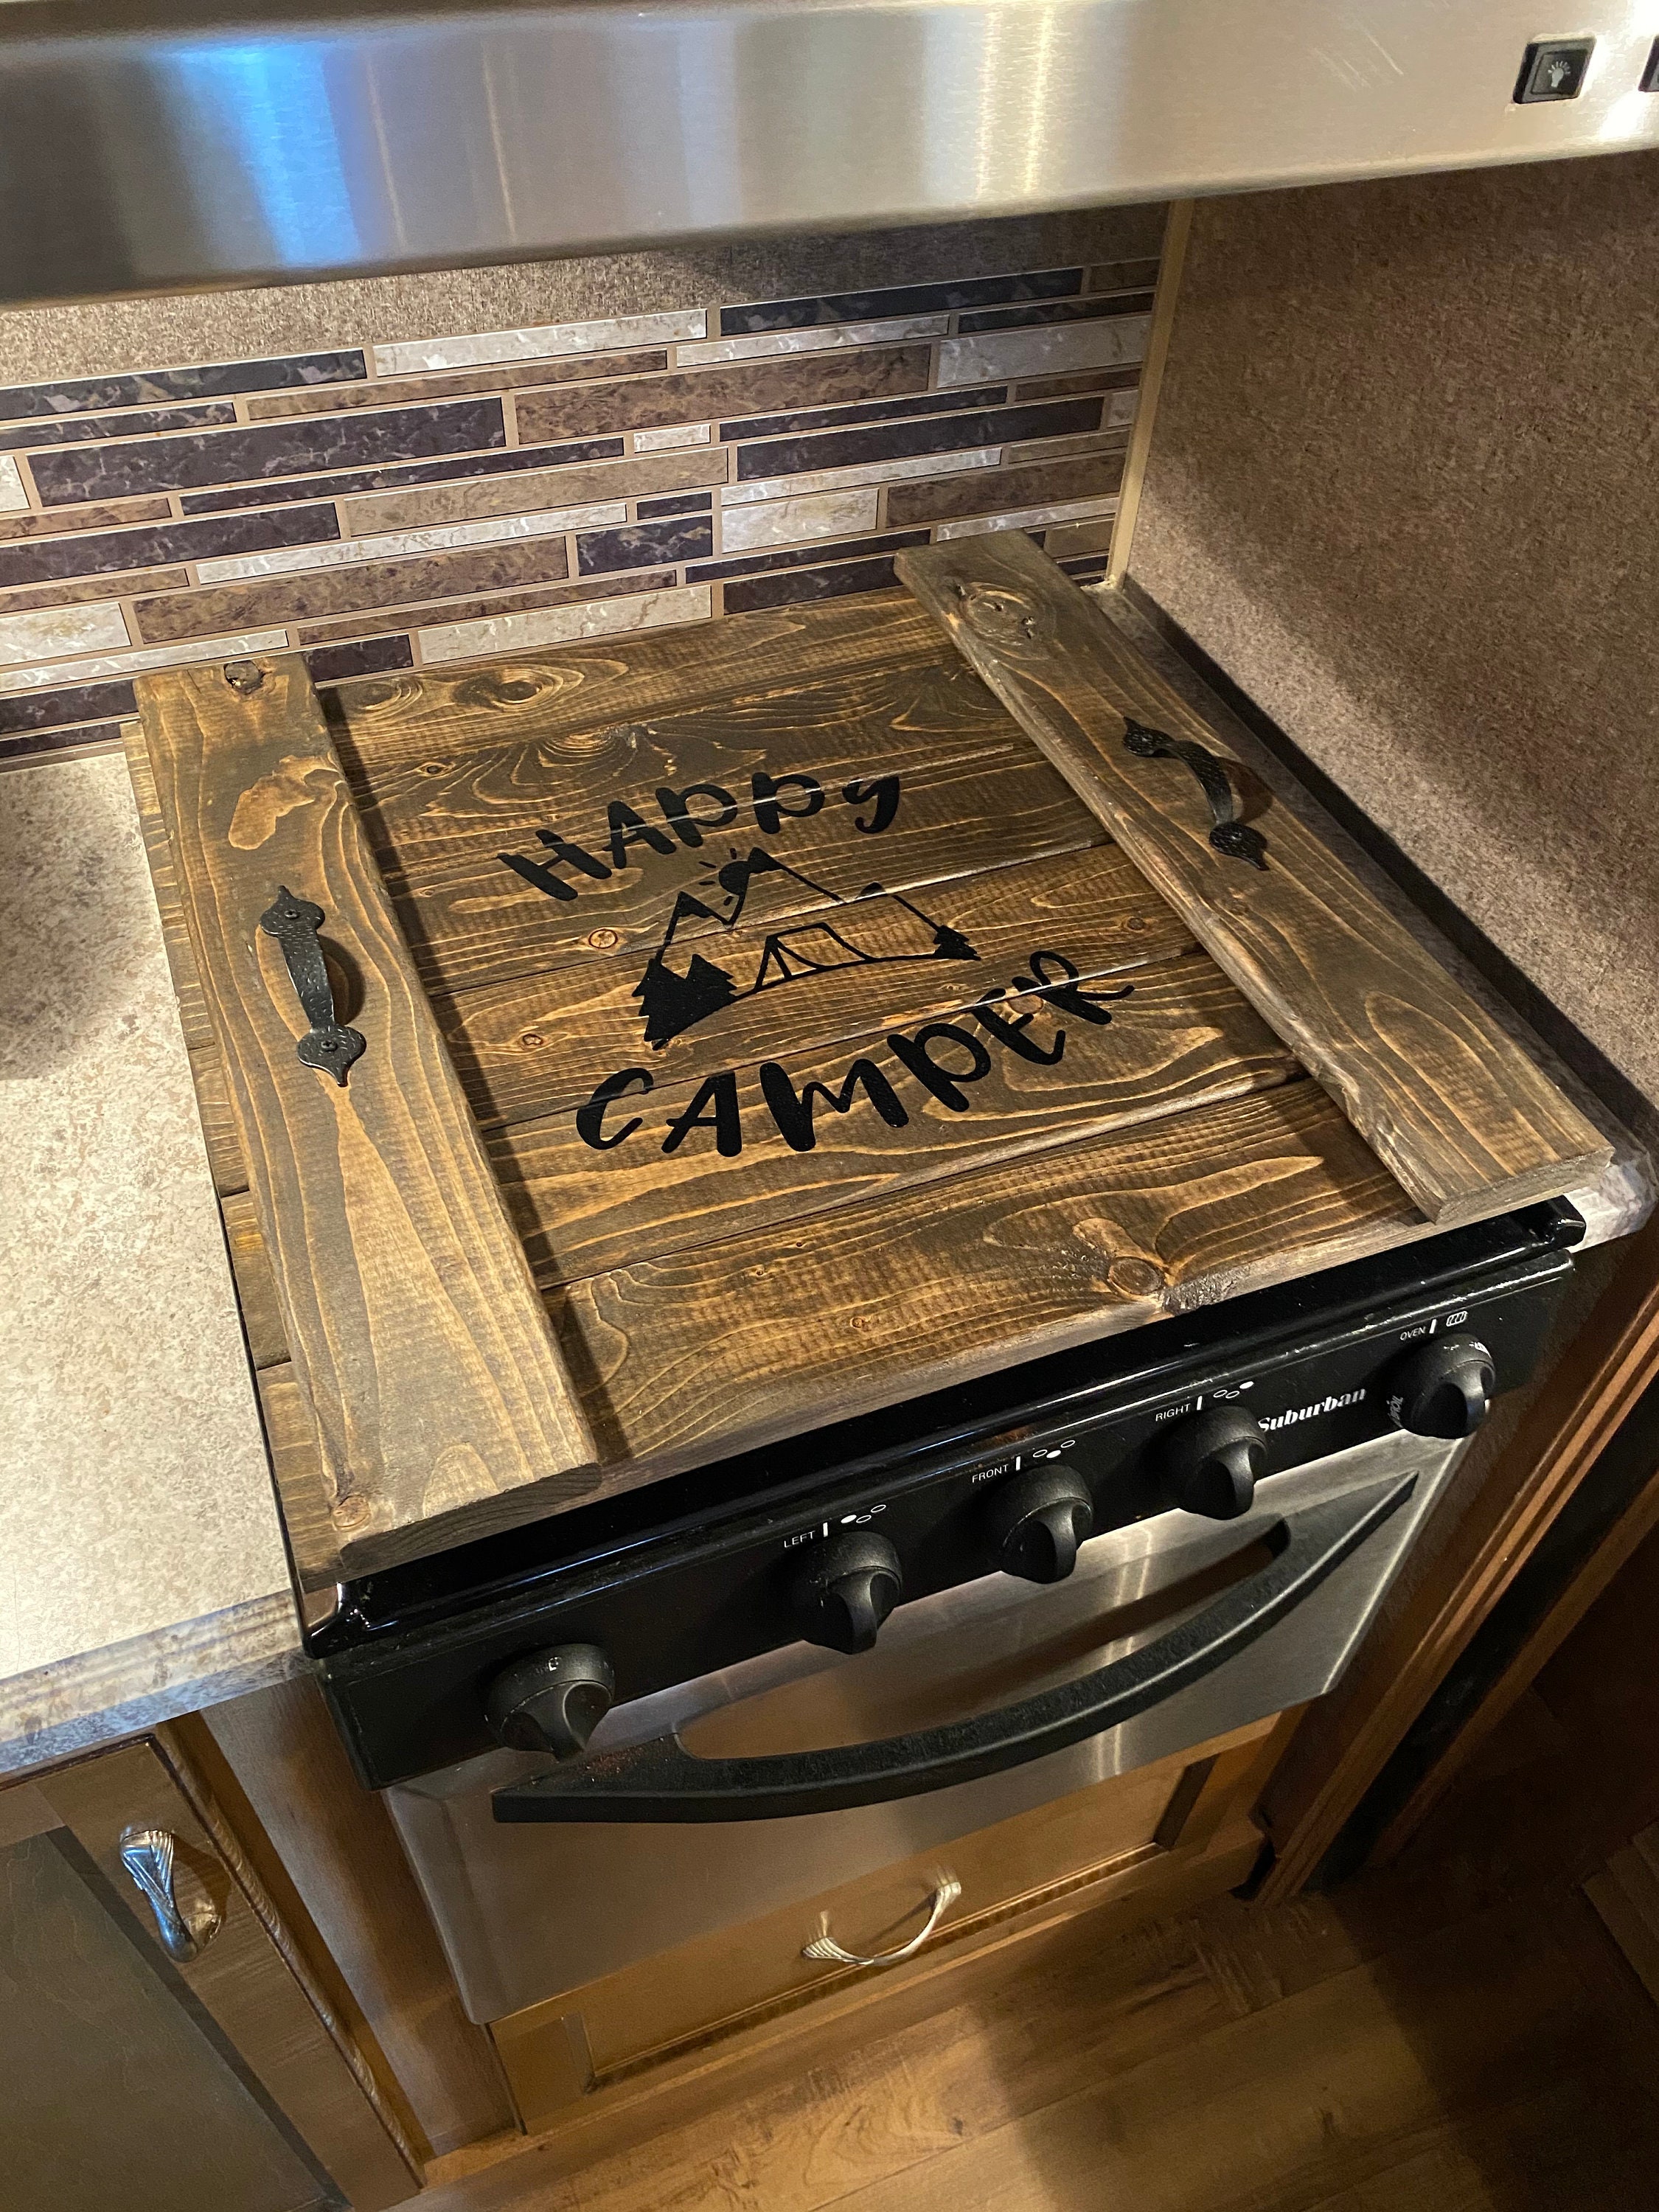 Handmade Large Cutting Board with Handles, Wood Stove Top Cover –  stonewondesigns